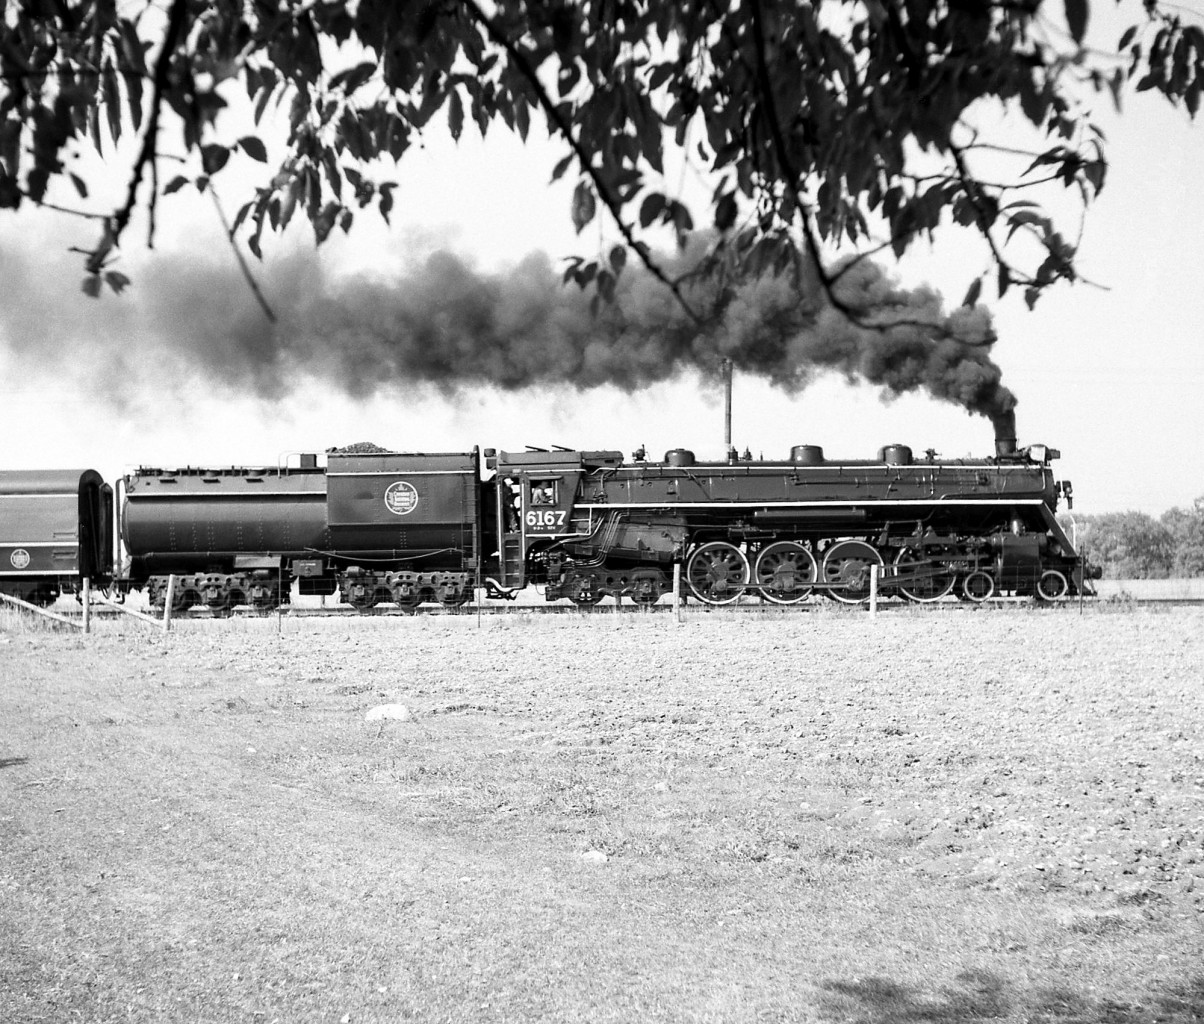 CNR 4-8-4 Northern 6167 is under steam on a UCRS excursion to Picton, on August 26th 1962. This was a great trip, starting from Toronto to Belleville, then Belleville to Trenton Junction, turning south on the Picton Sub for the 30 mile trip to Picton with four run-pasts. Two GP9 units, 4459 & 4472, pulled us backwards to Trenton where we left making a high speed run back to Toronto.

Note: geotagged location not exact.